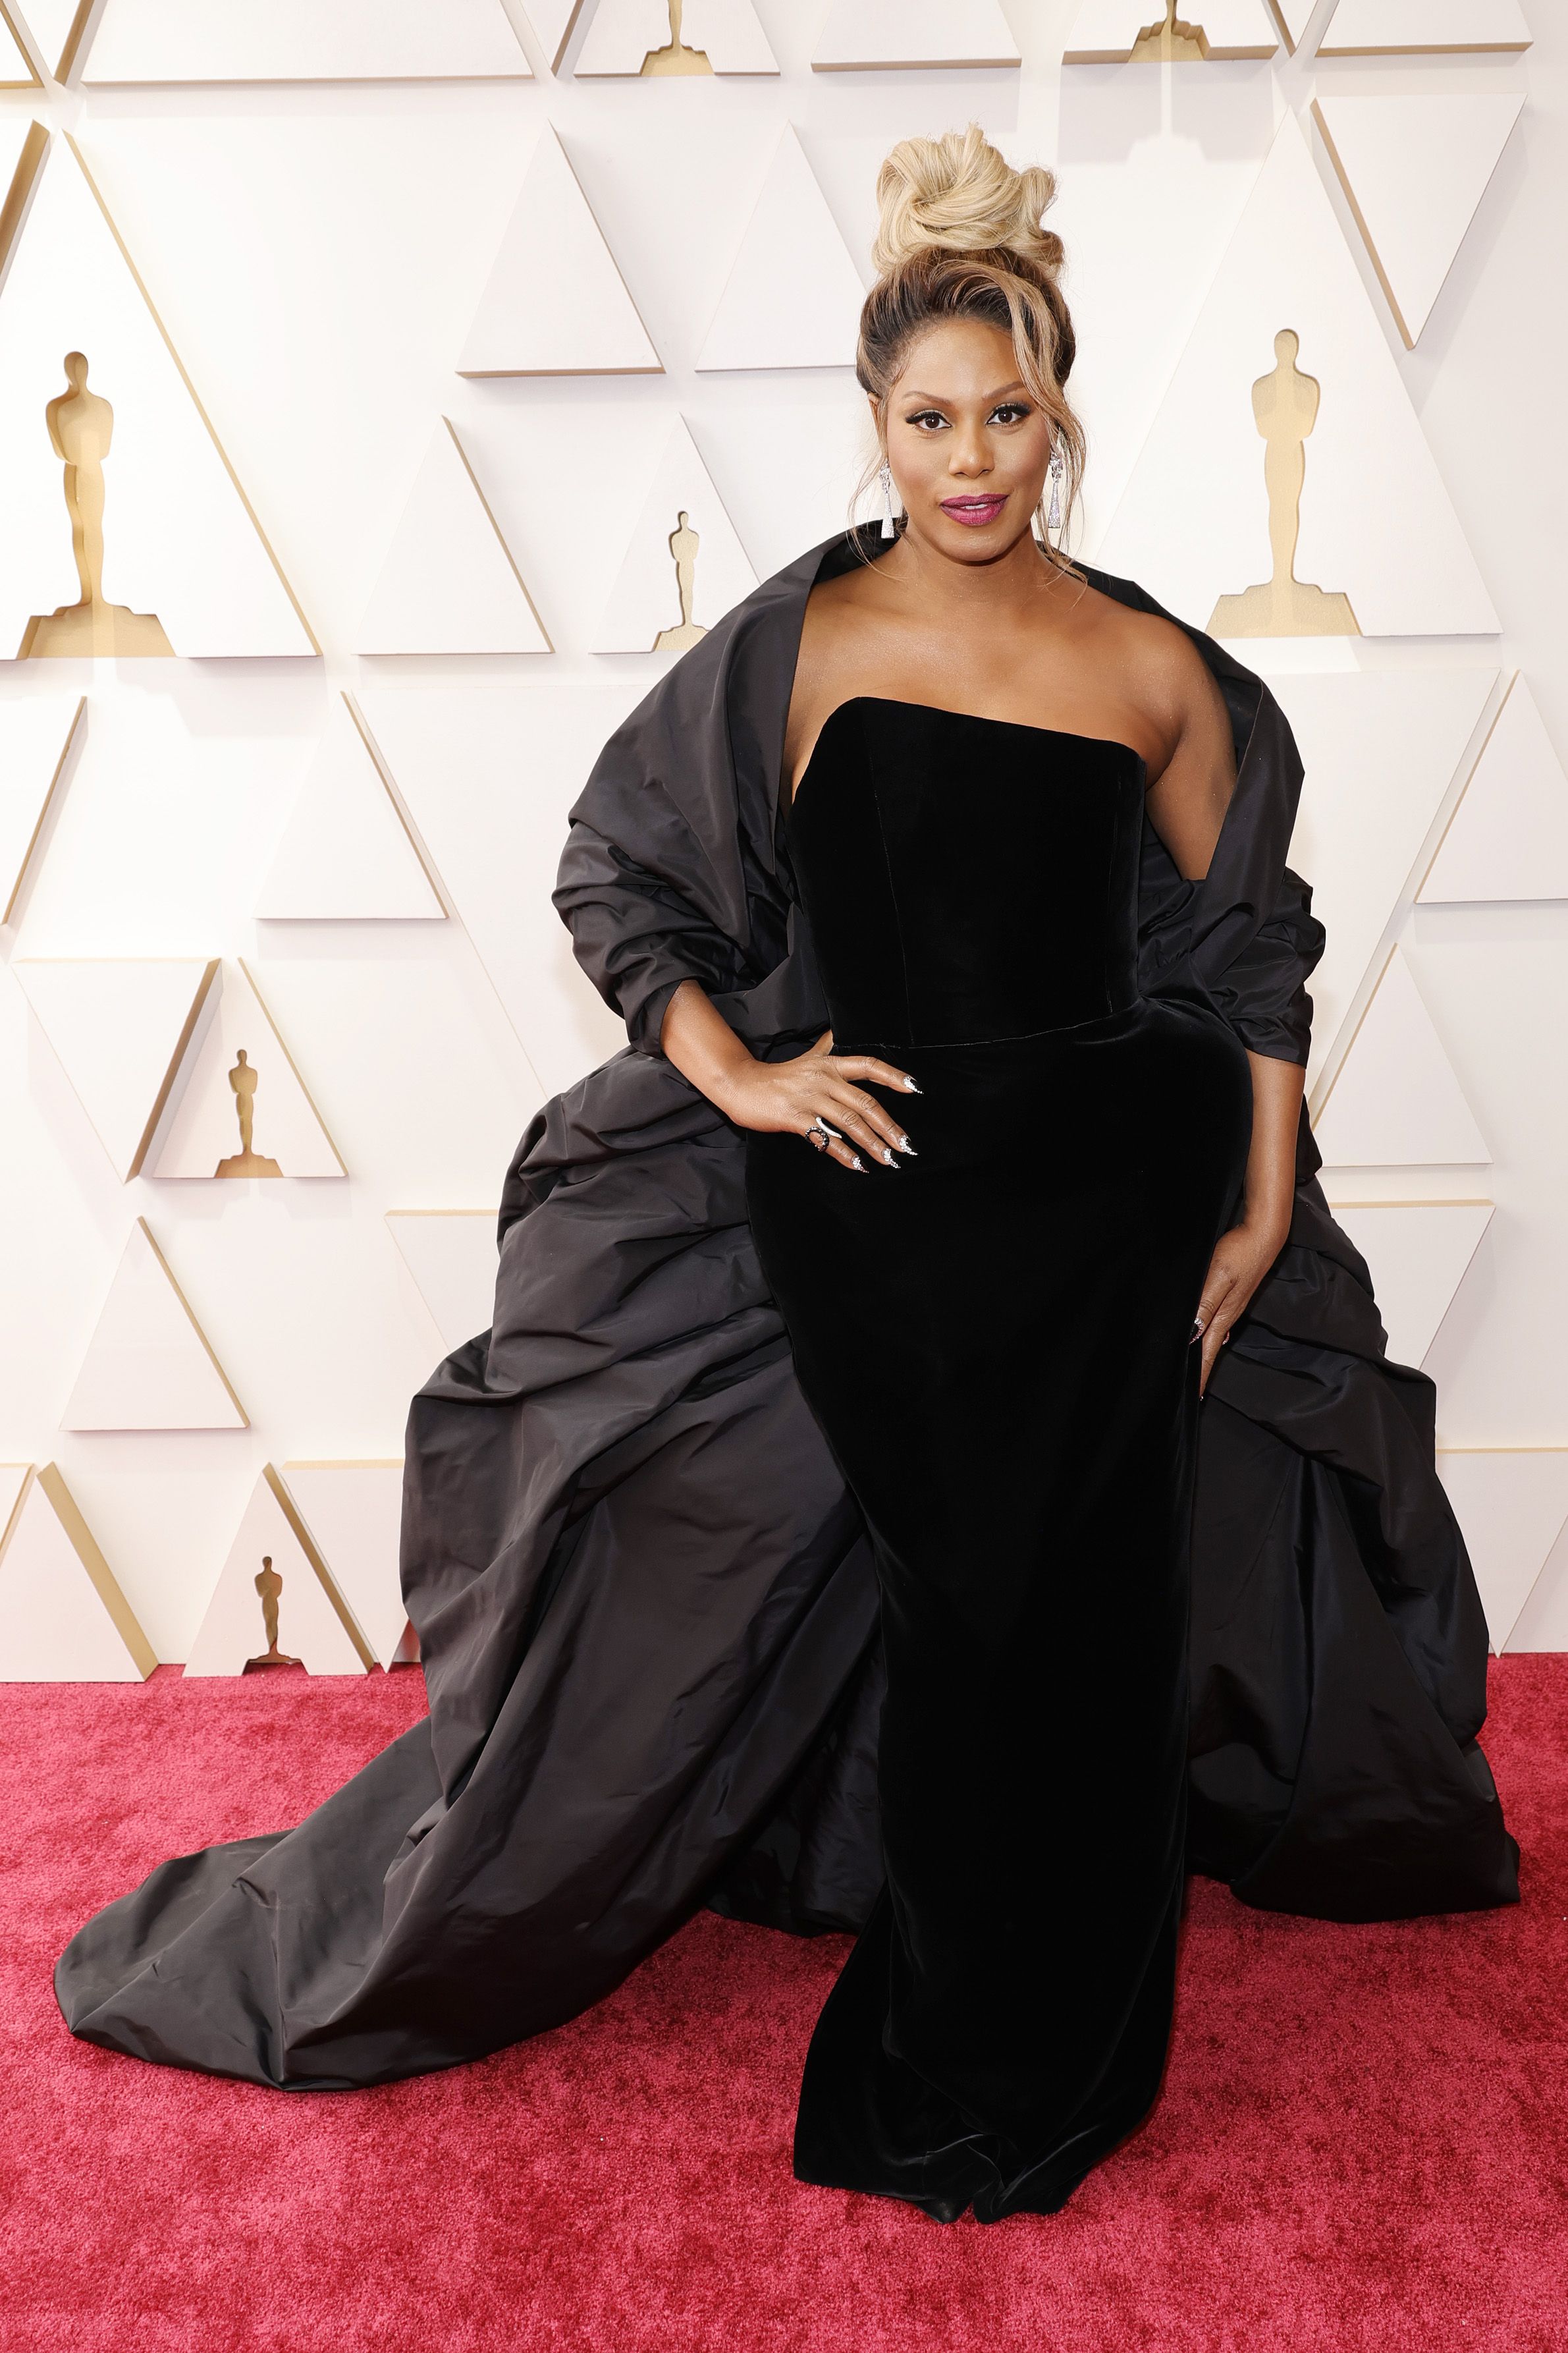 Oscars Red Carpet 2022: The Academy Awards 2022 Style Trend Is the